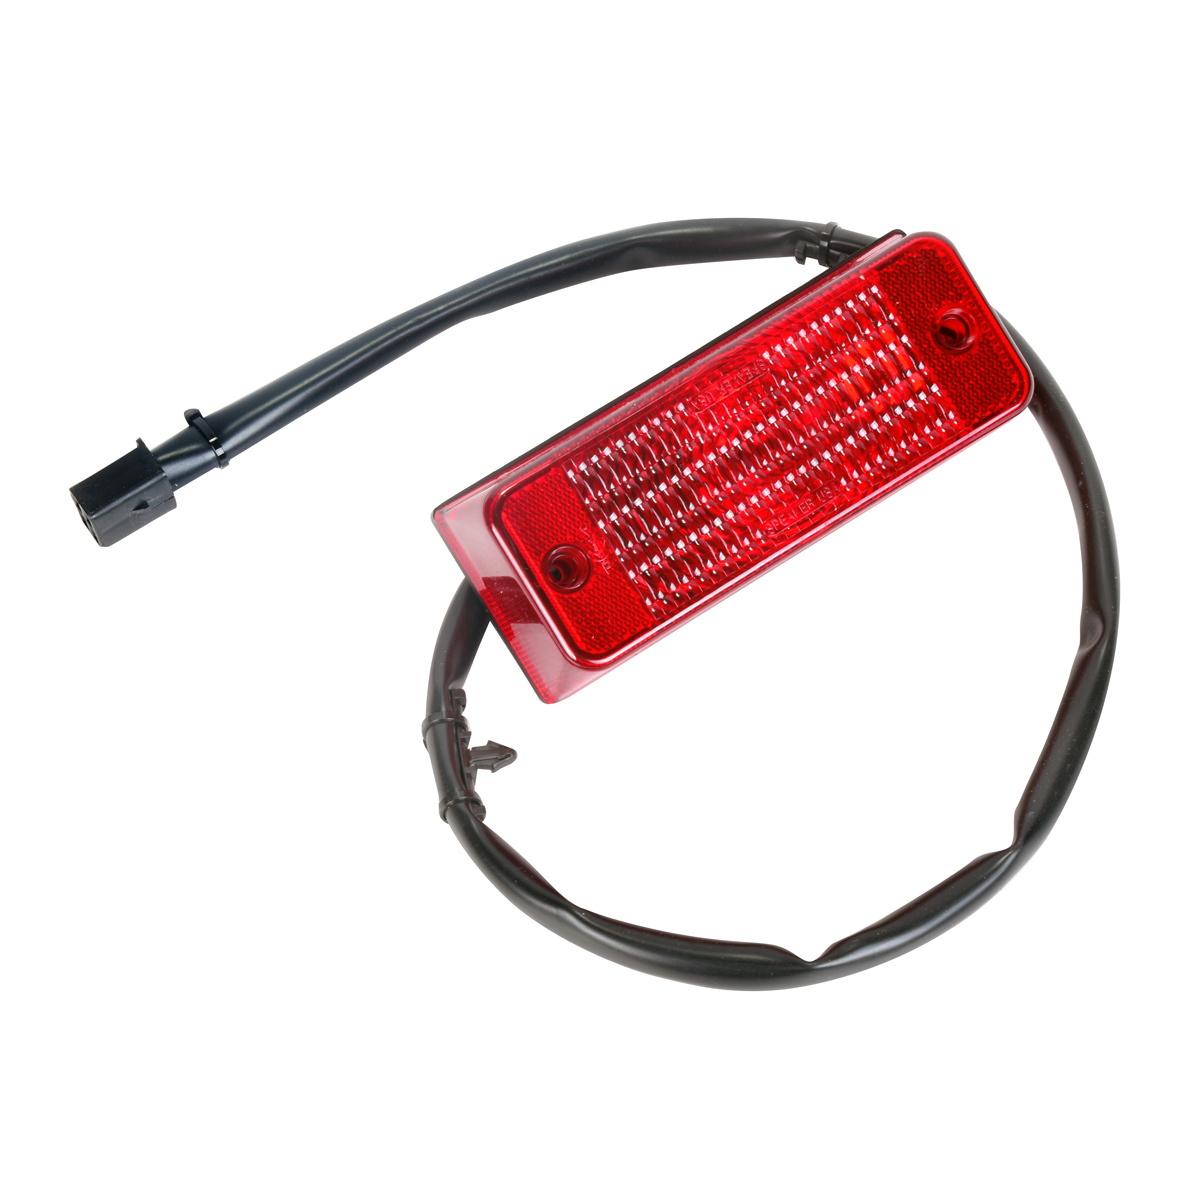 Taillight for HPX, TH, TS, TX and XUV Gators